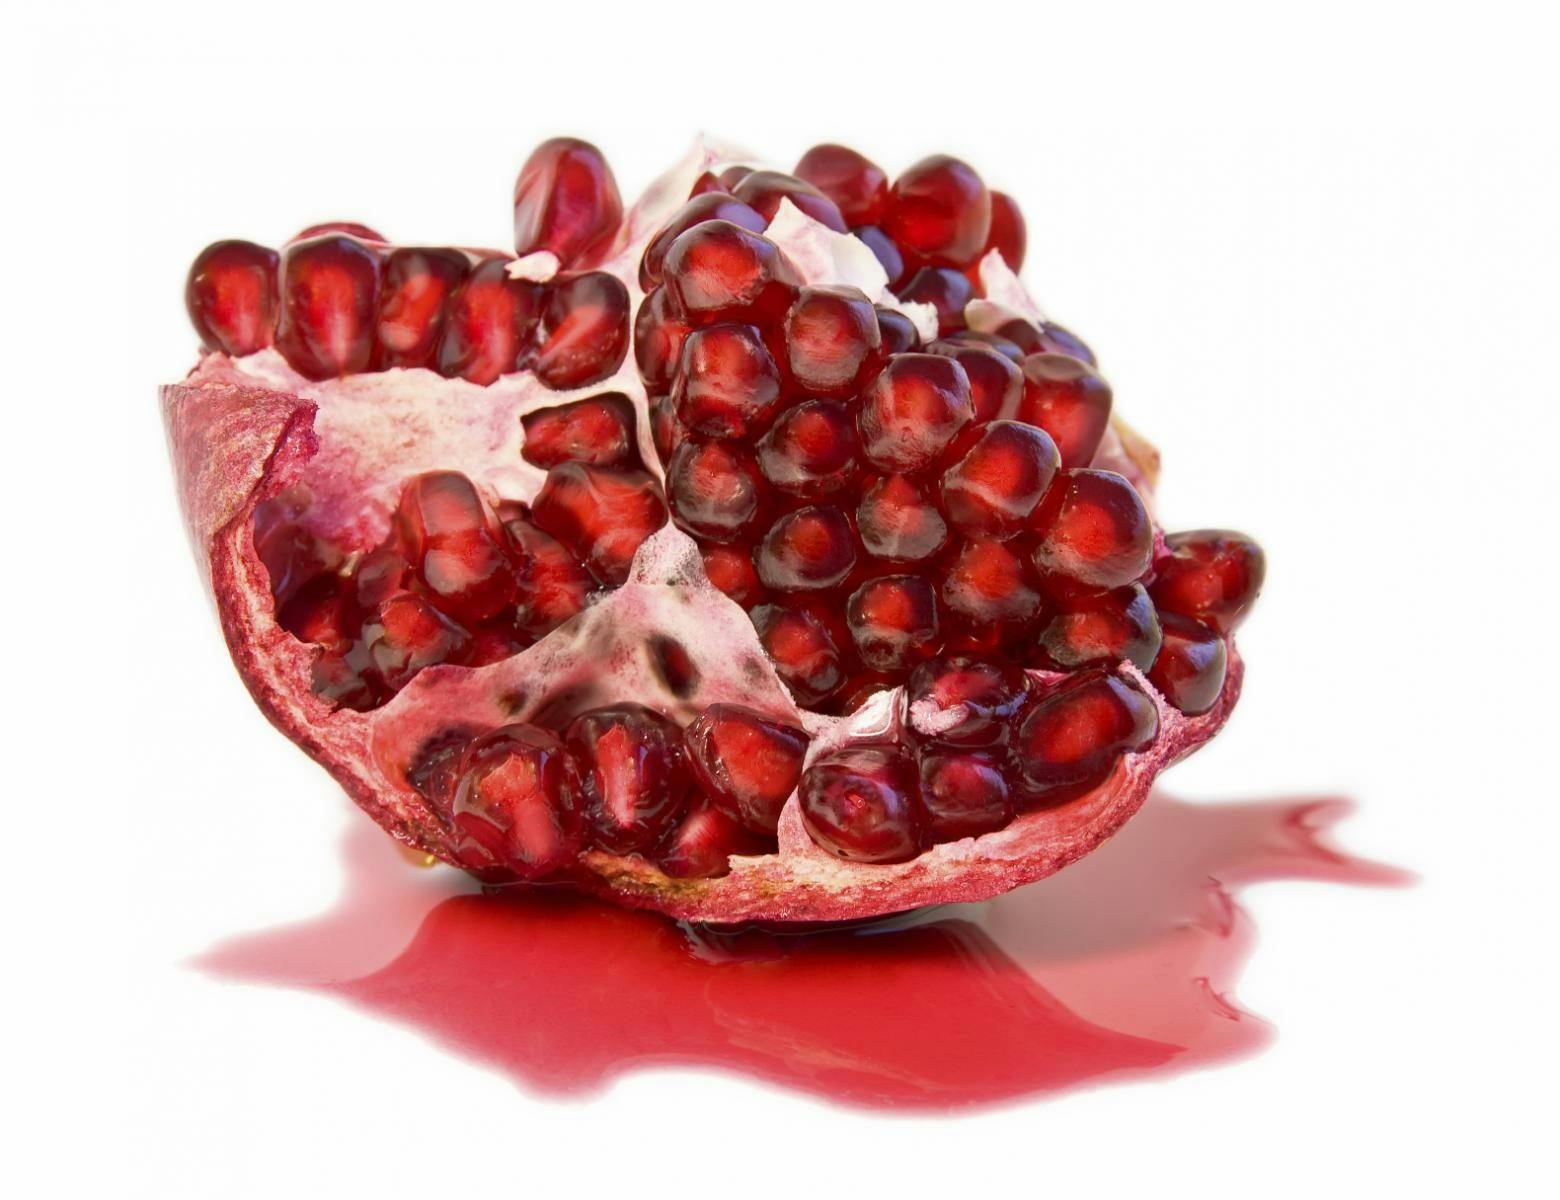 Pomegranate Adulteration and Test Methods Evaluated in New Guidance Document